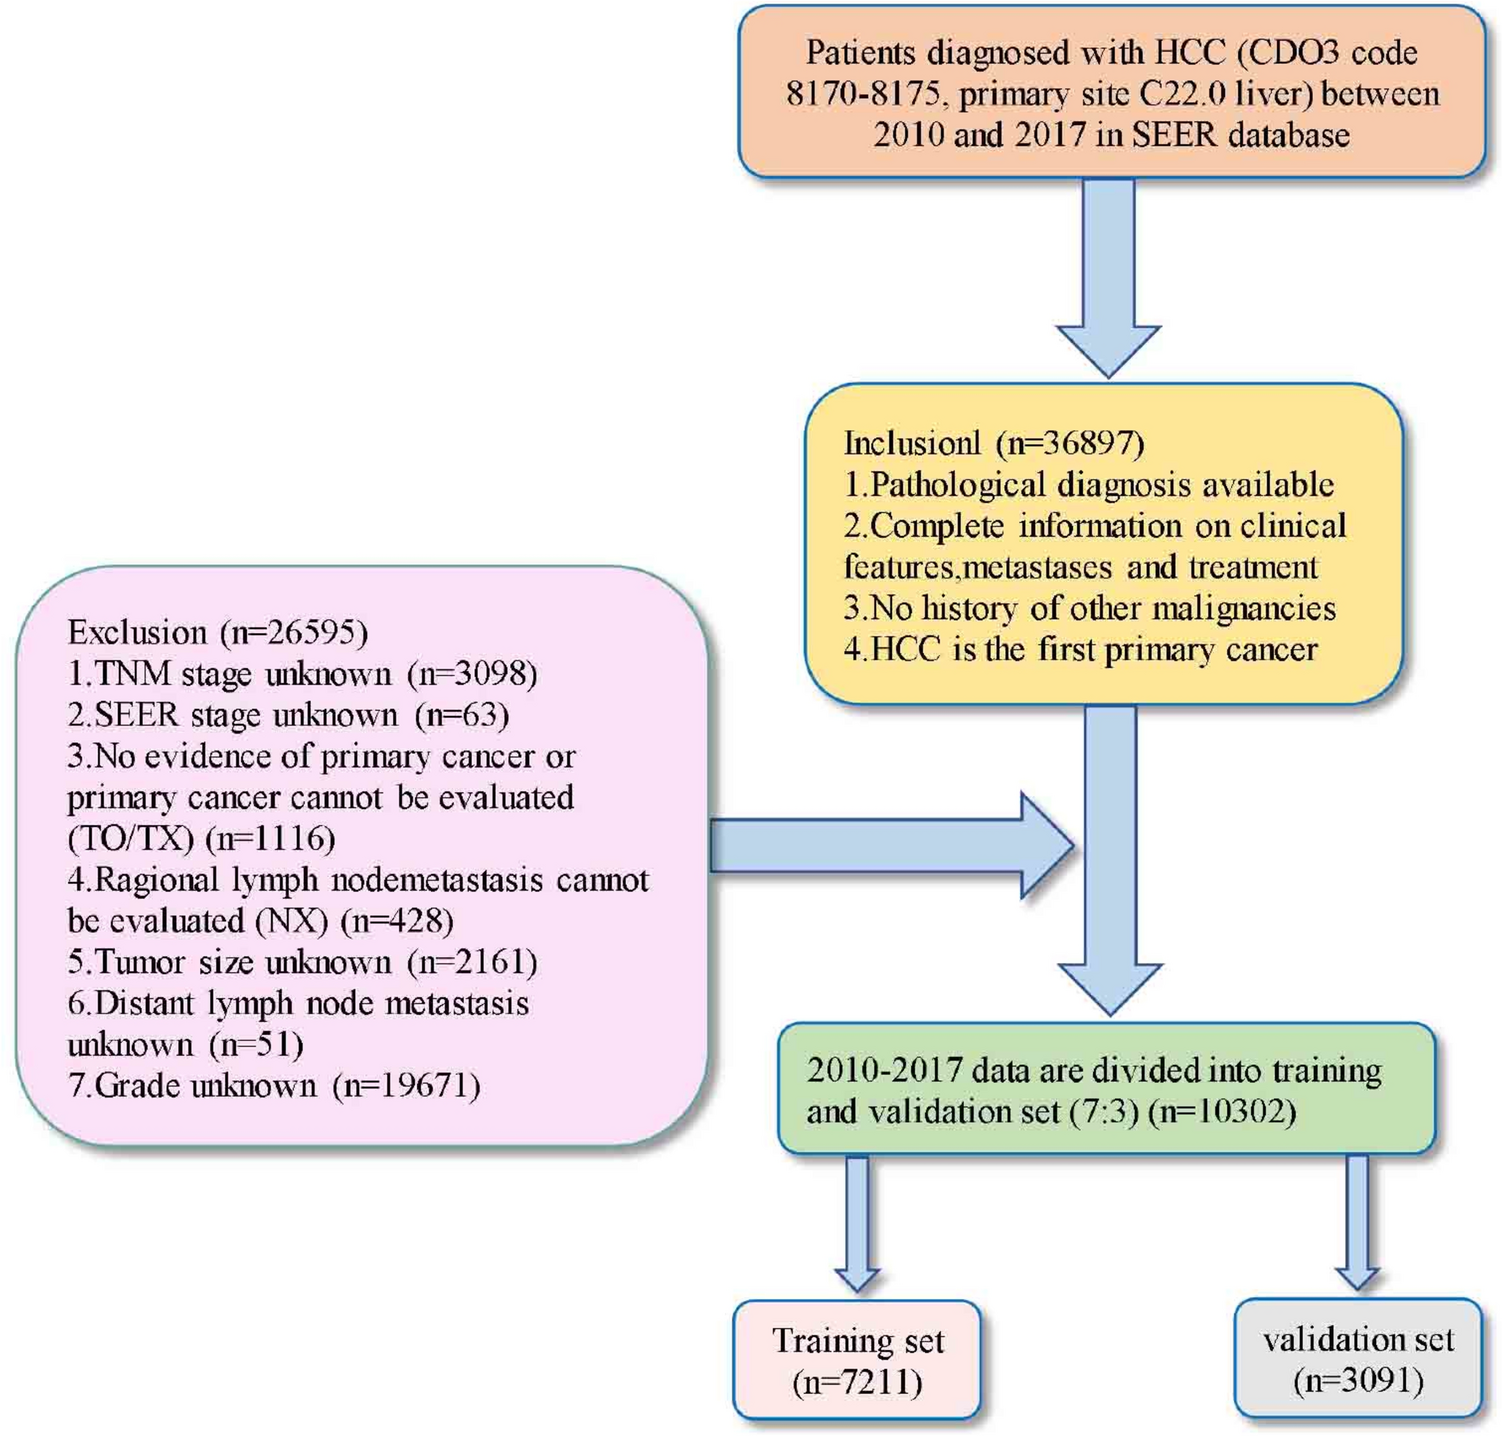 Development and evaluation of nomograms and risk stratification systems to predict the overall survival and cancer-specific survival of patients with hepatocellular carcinoma